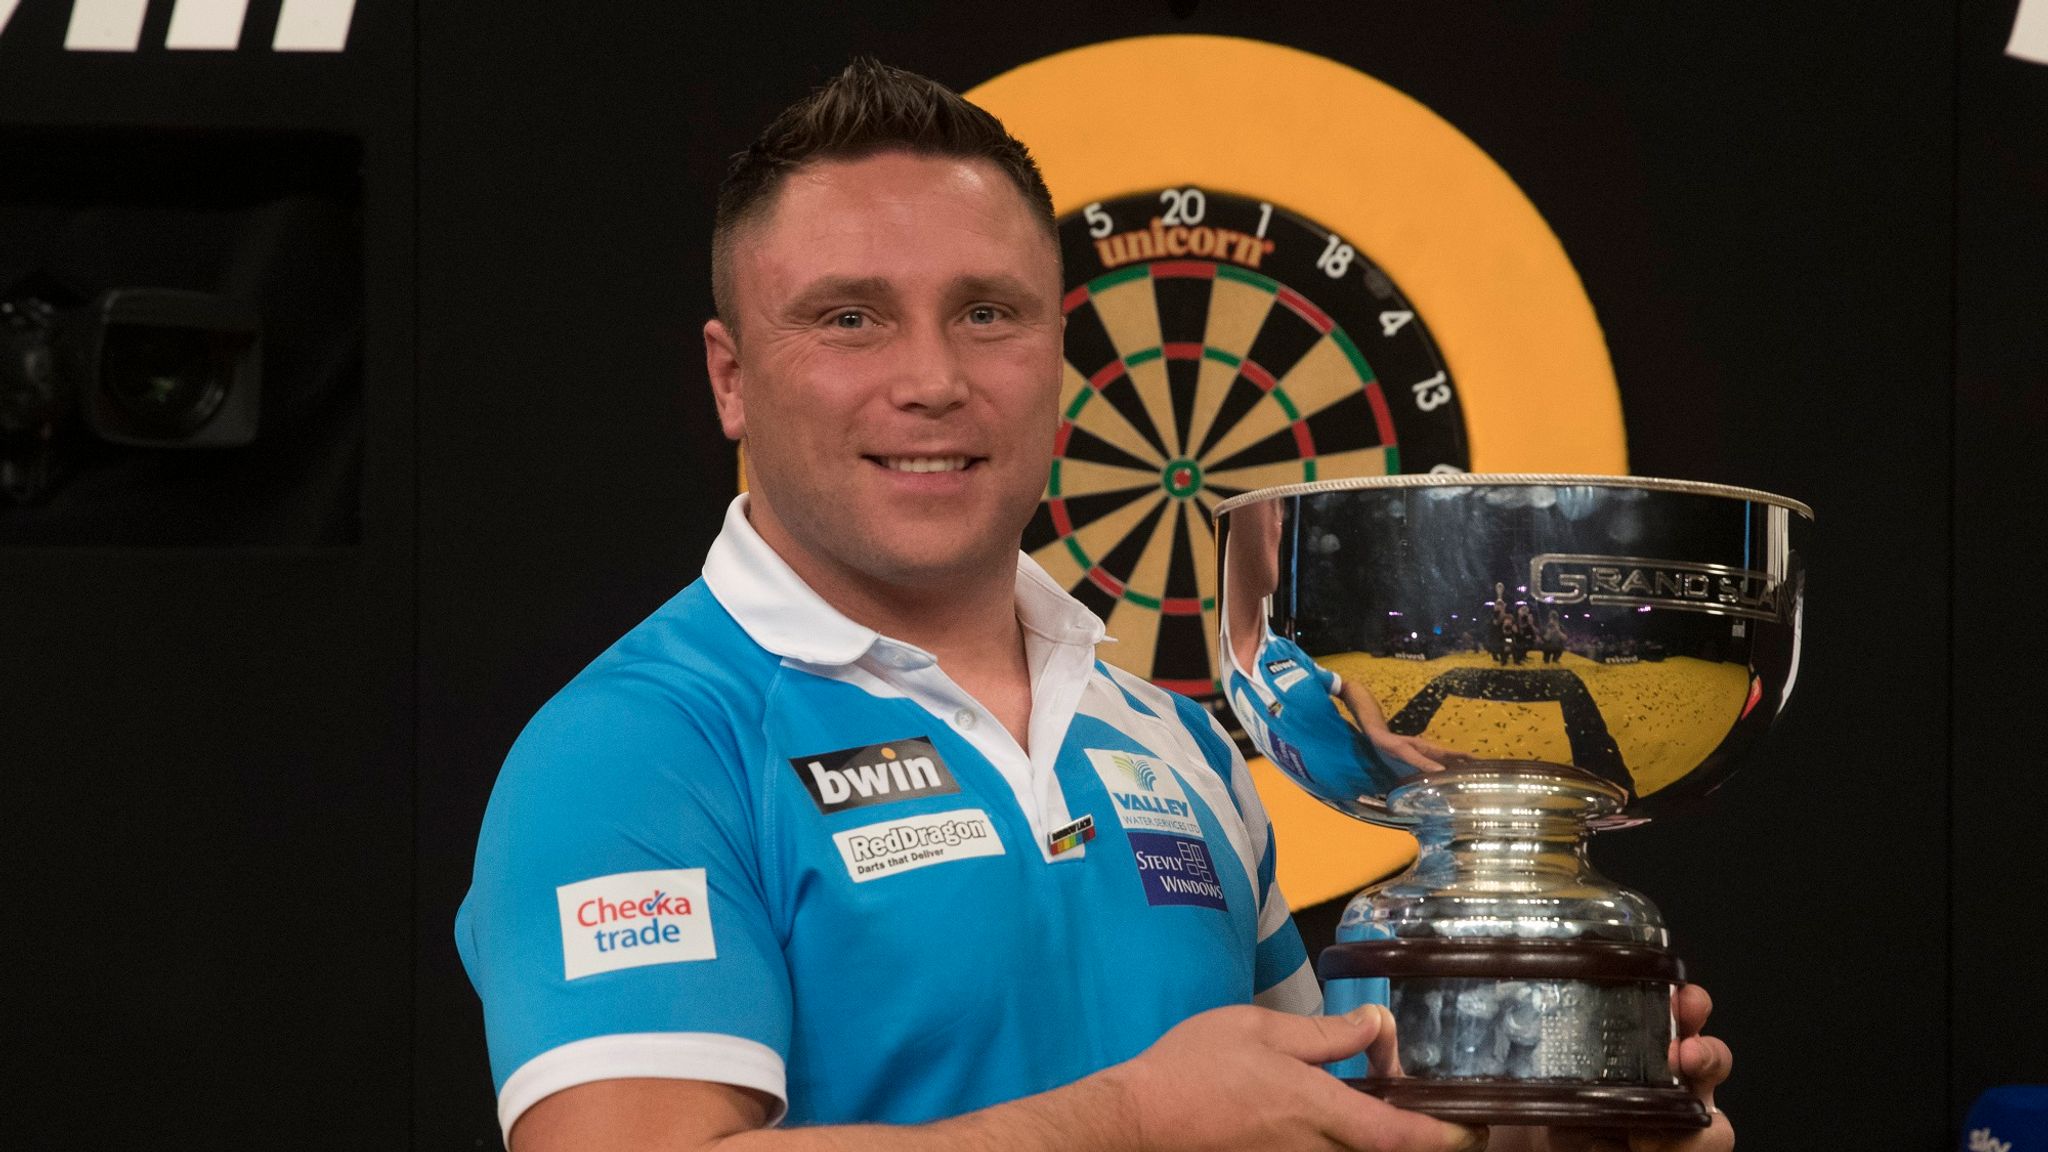 Grand Slam of Darts: Full schedule and results of this year's tournament in | Darts News | Sky Sports